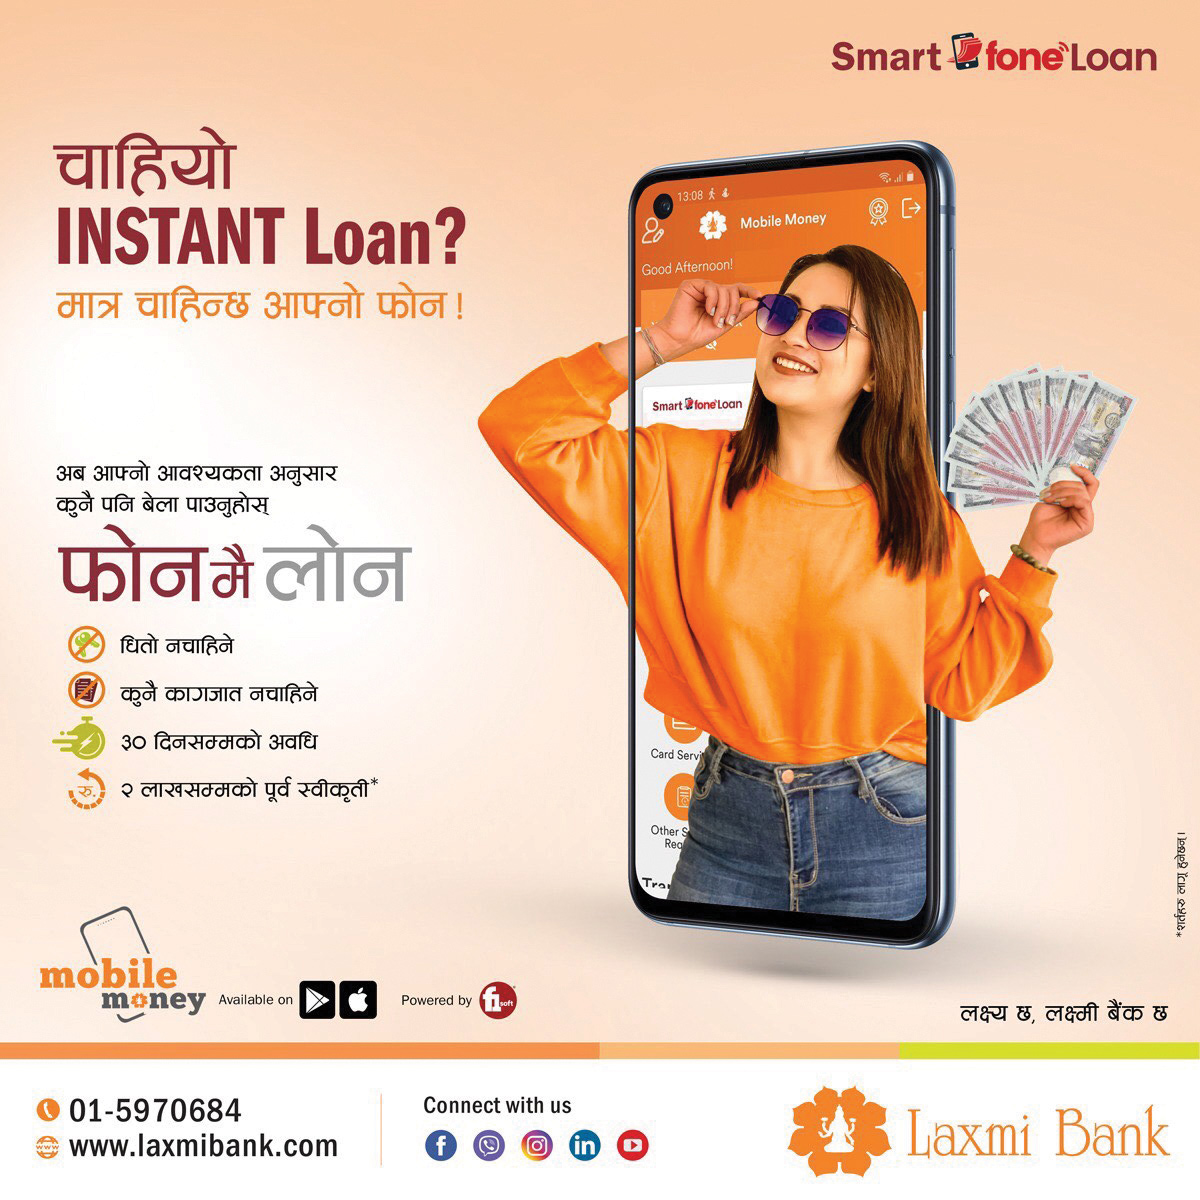 Laxmi Bank launches Smart FoneLoan powered by F1Soft